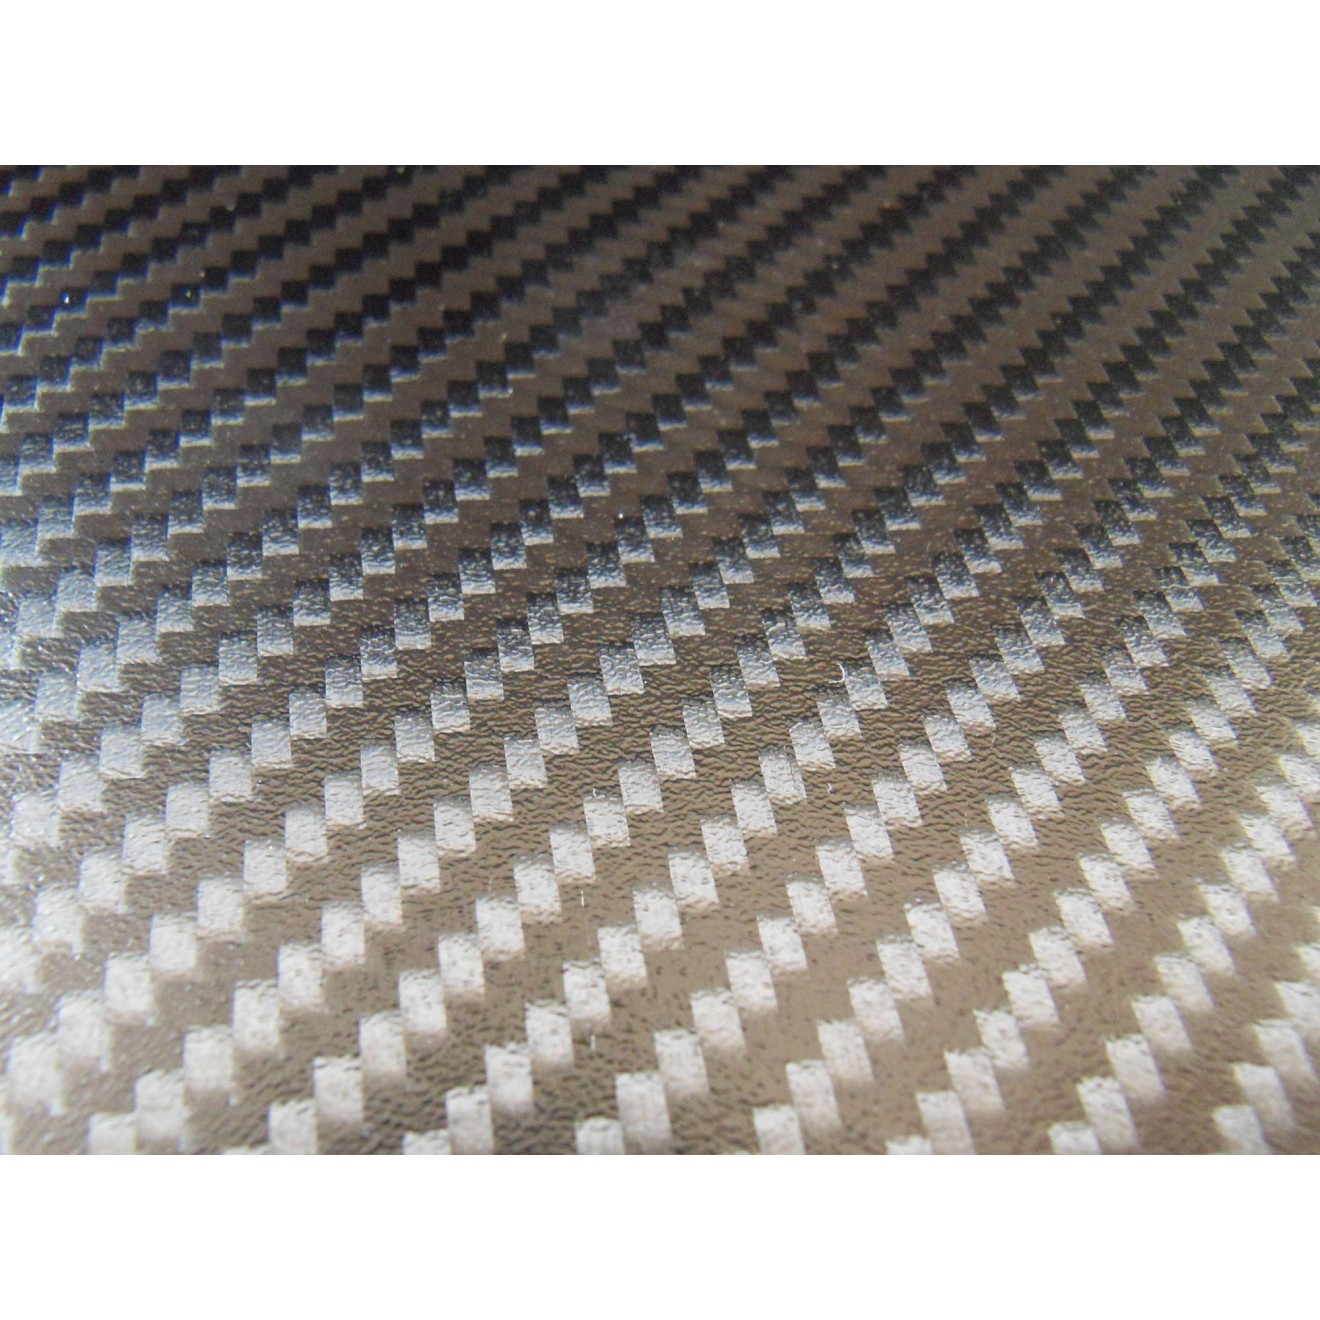 Carbon Fiber/Epoxy Sheets 970x600mm, surface textured finished